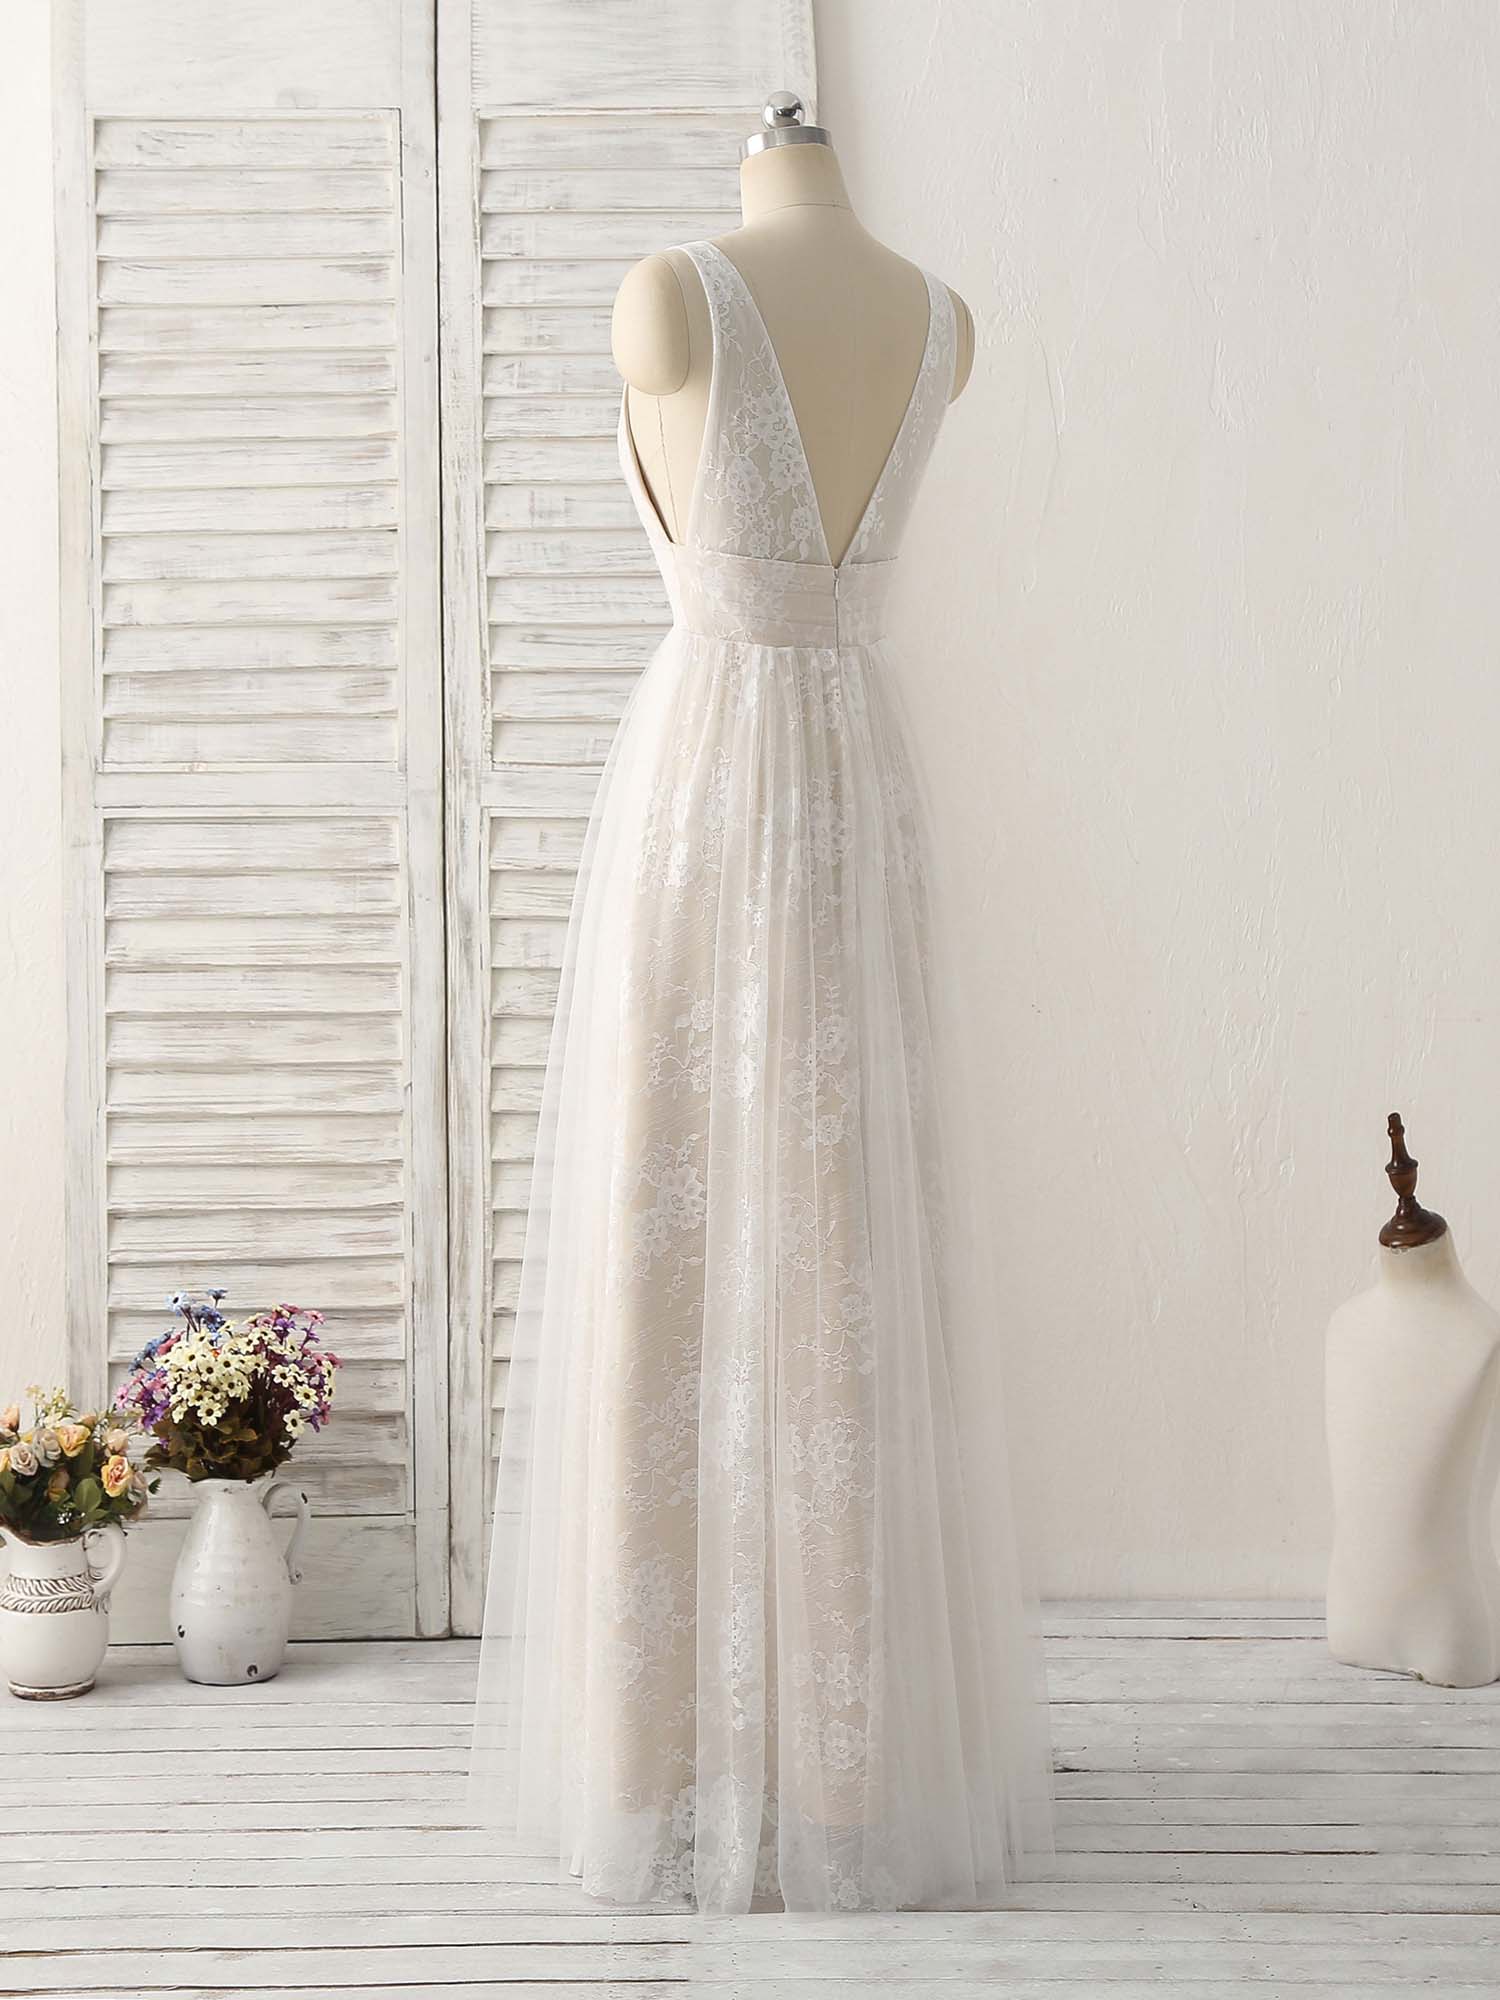 Prom Dresses For Girls, White V Neck Lace Long Prom Dress Backless Lace Evening Dress